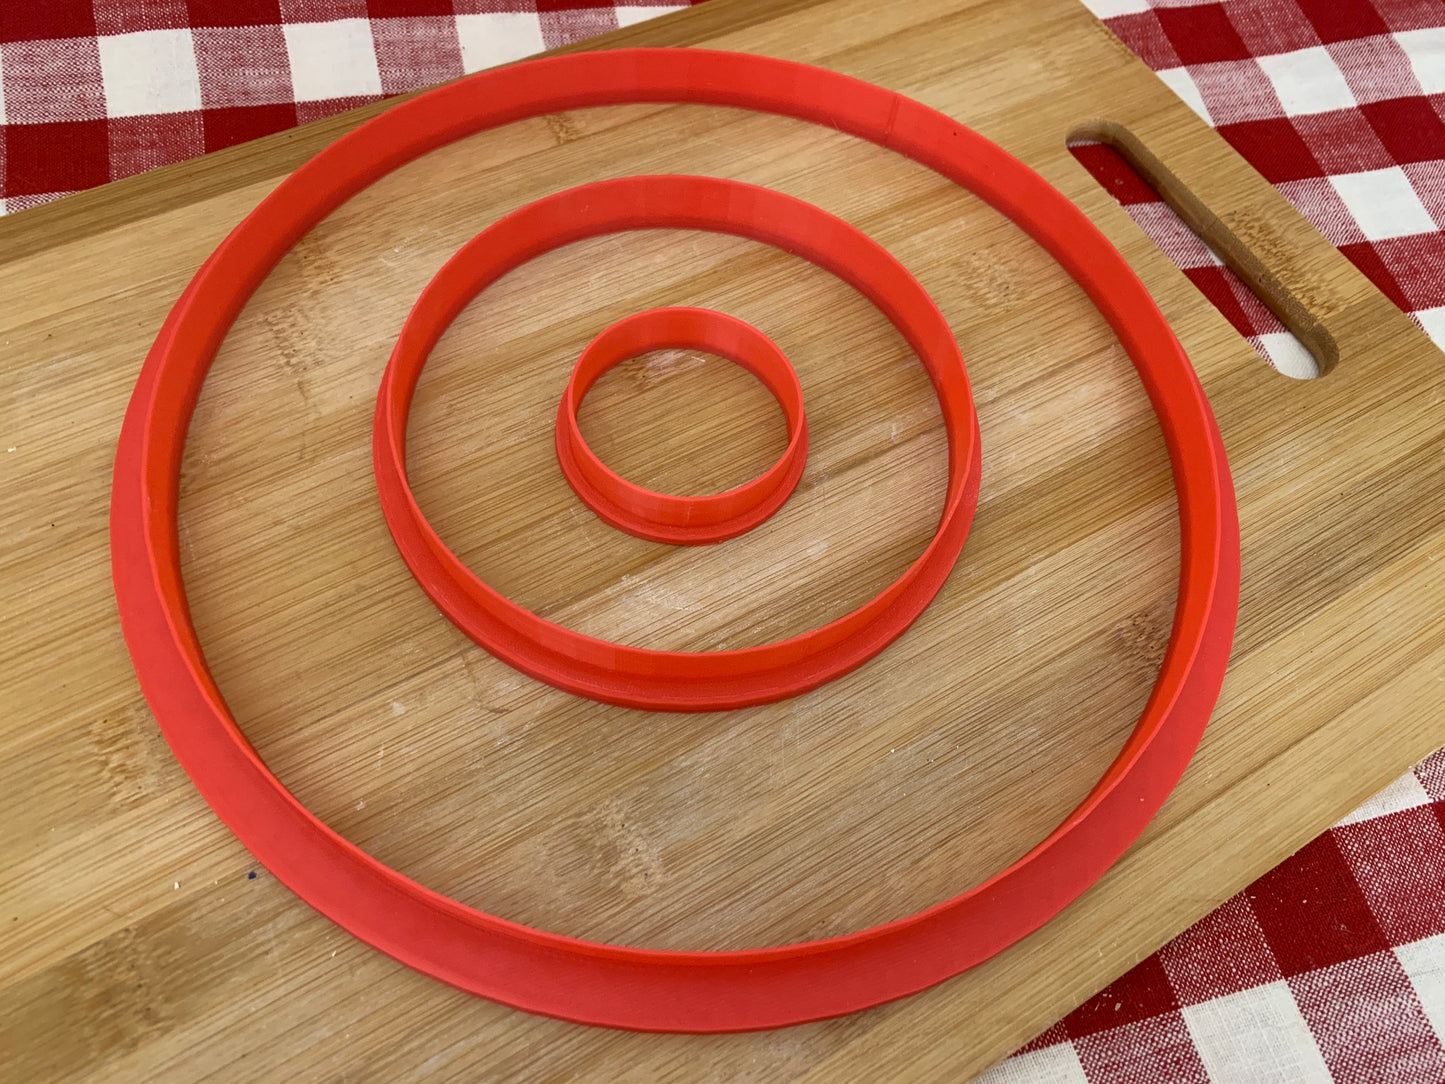 Plain Circle, Clay Cutter - plastic 3D printed, pottery tool, multiple sizes